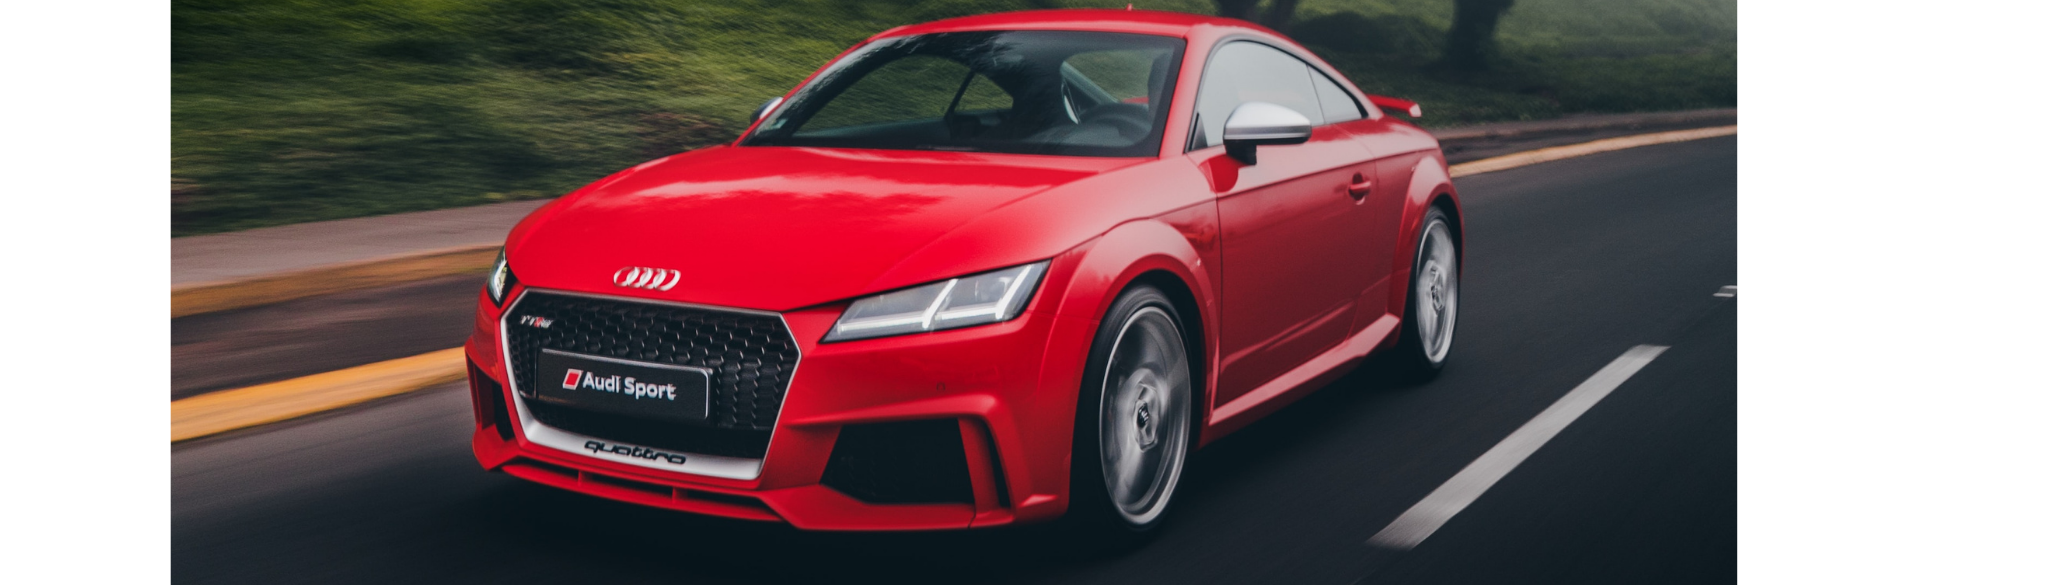 Red Audi TTRS Coupe exterior front driving down the road